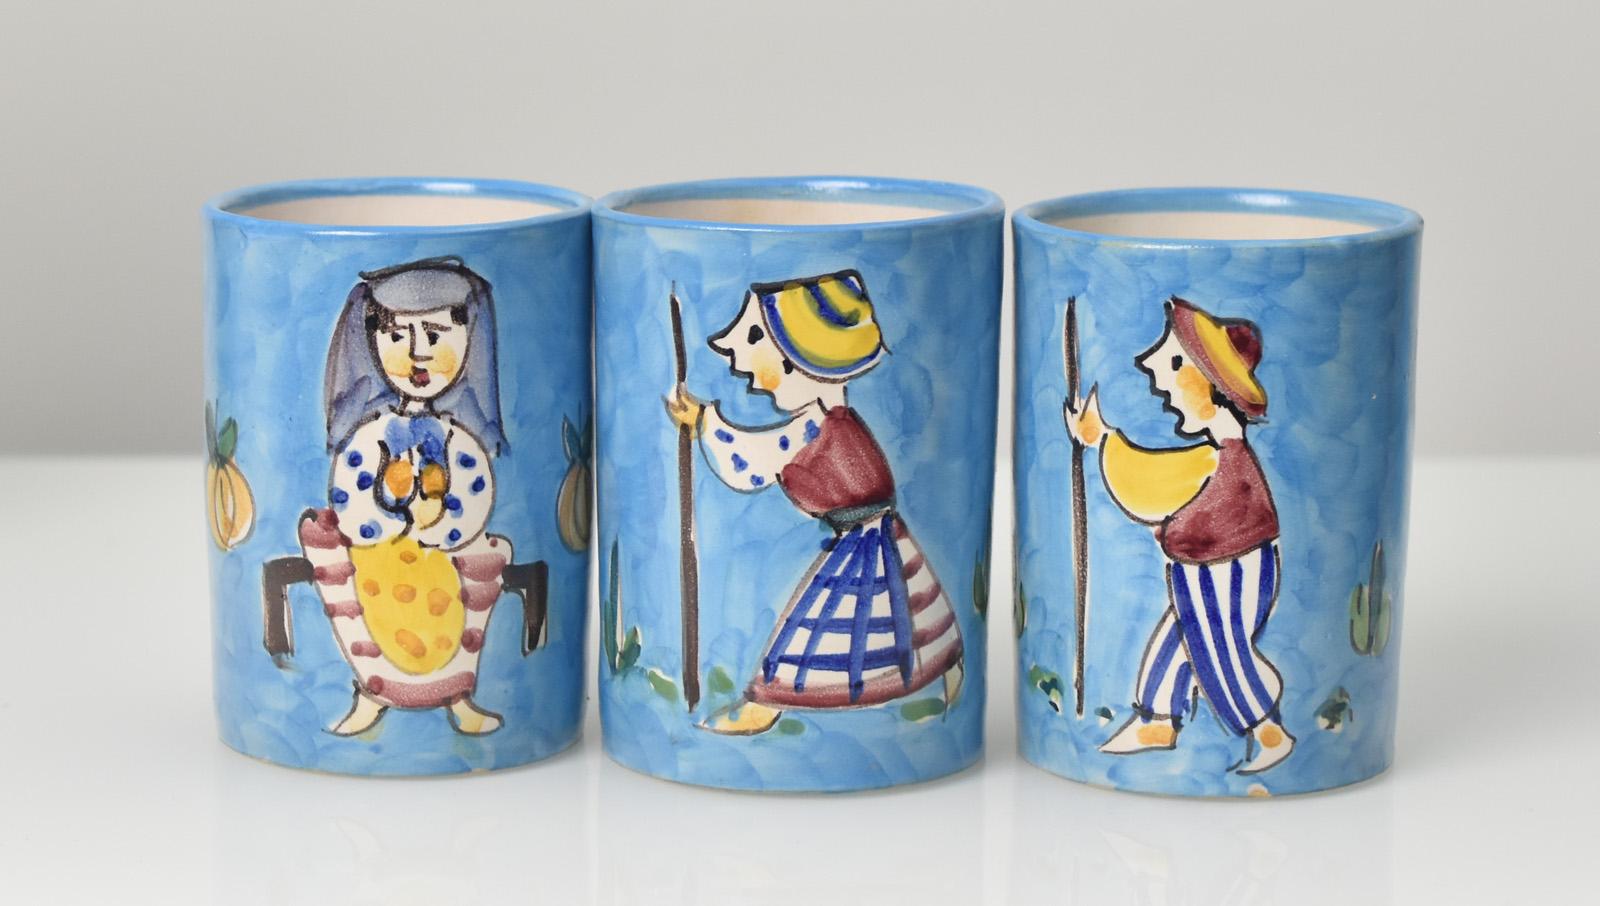 Mid-Century Modern pottery lemonade set by CAS Vietri Italy set consisting of a pitcher, 6 beakers and a matching coffee mug. All pieces are decorated with hand painted scenes of rural life reminding of designs by Irene Kowaliska for